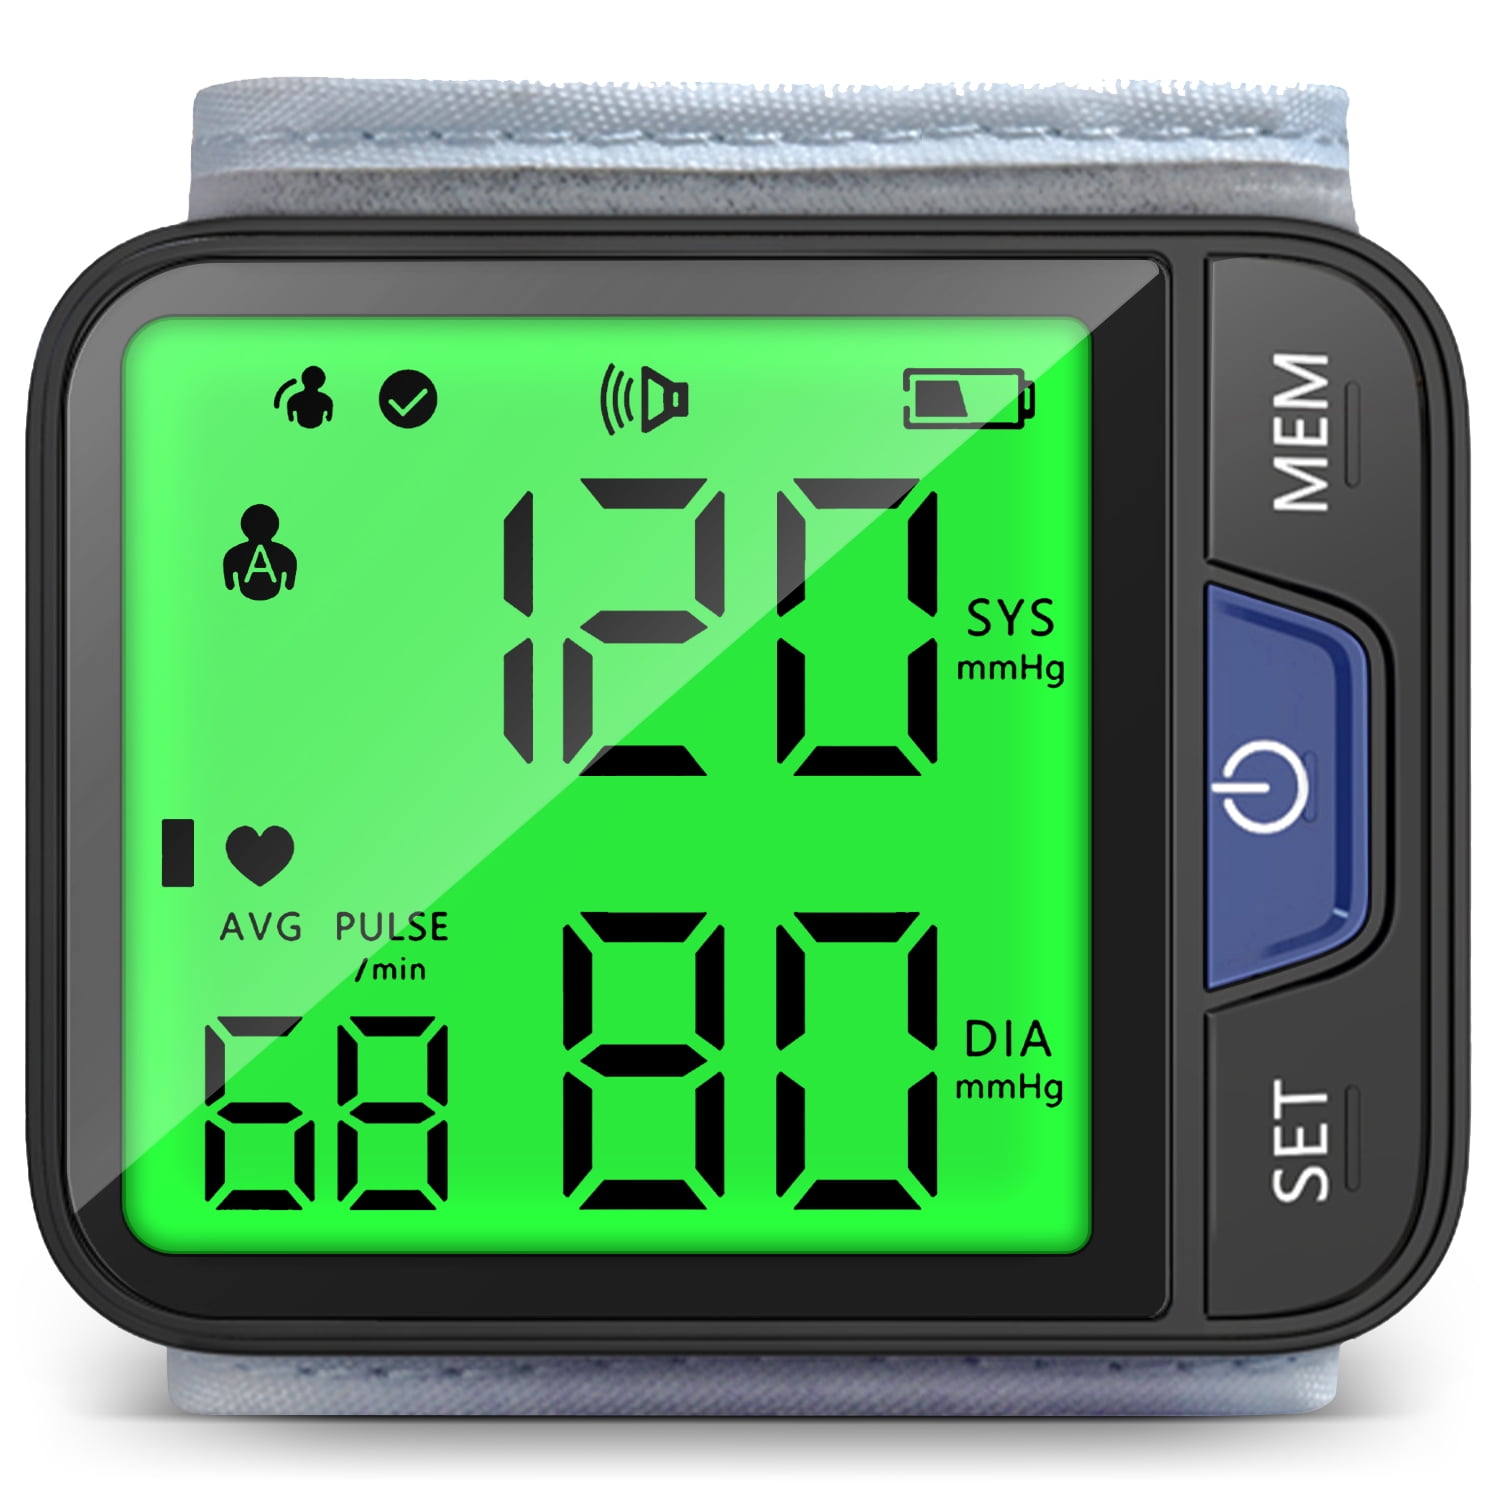 Blood pressure monitors - We care for Your health